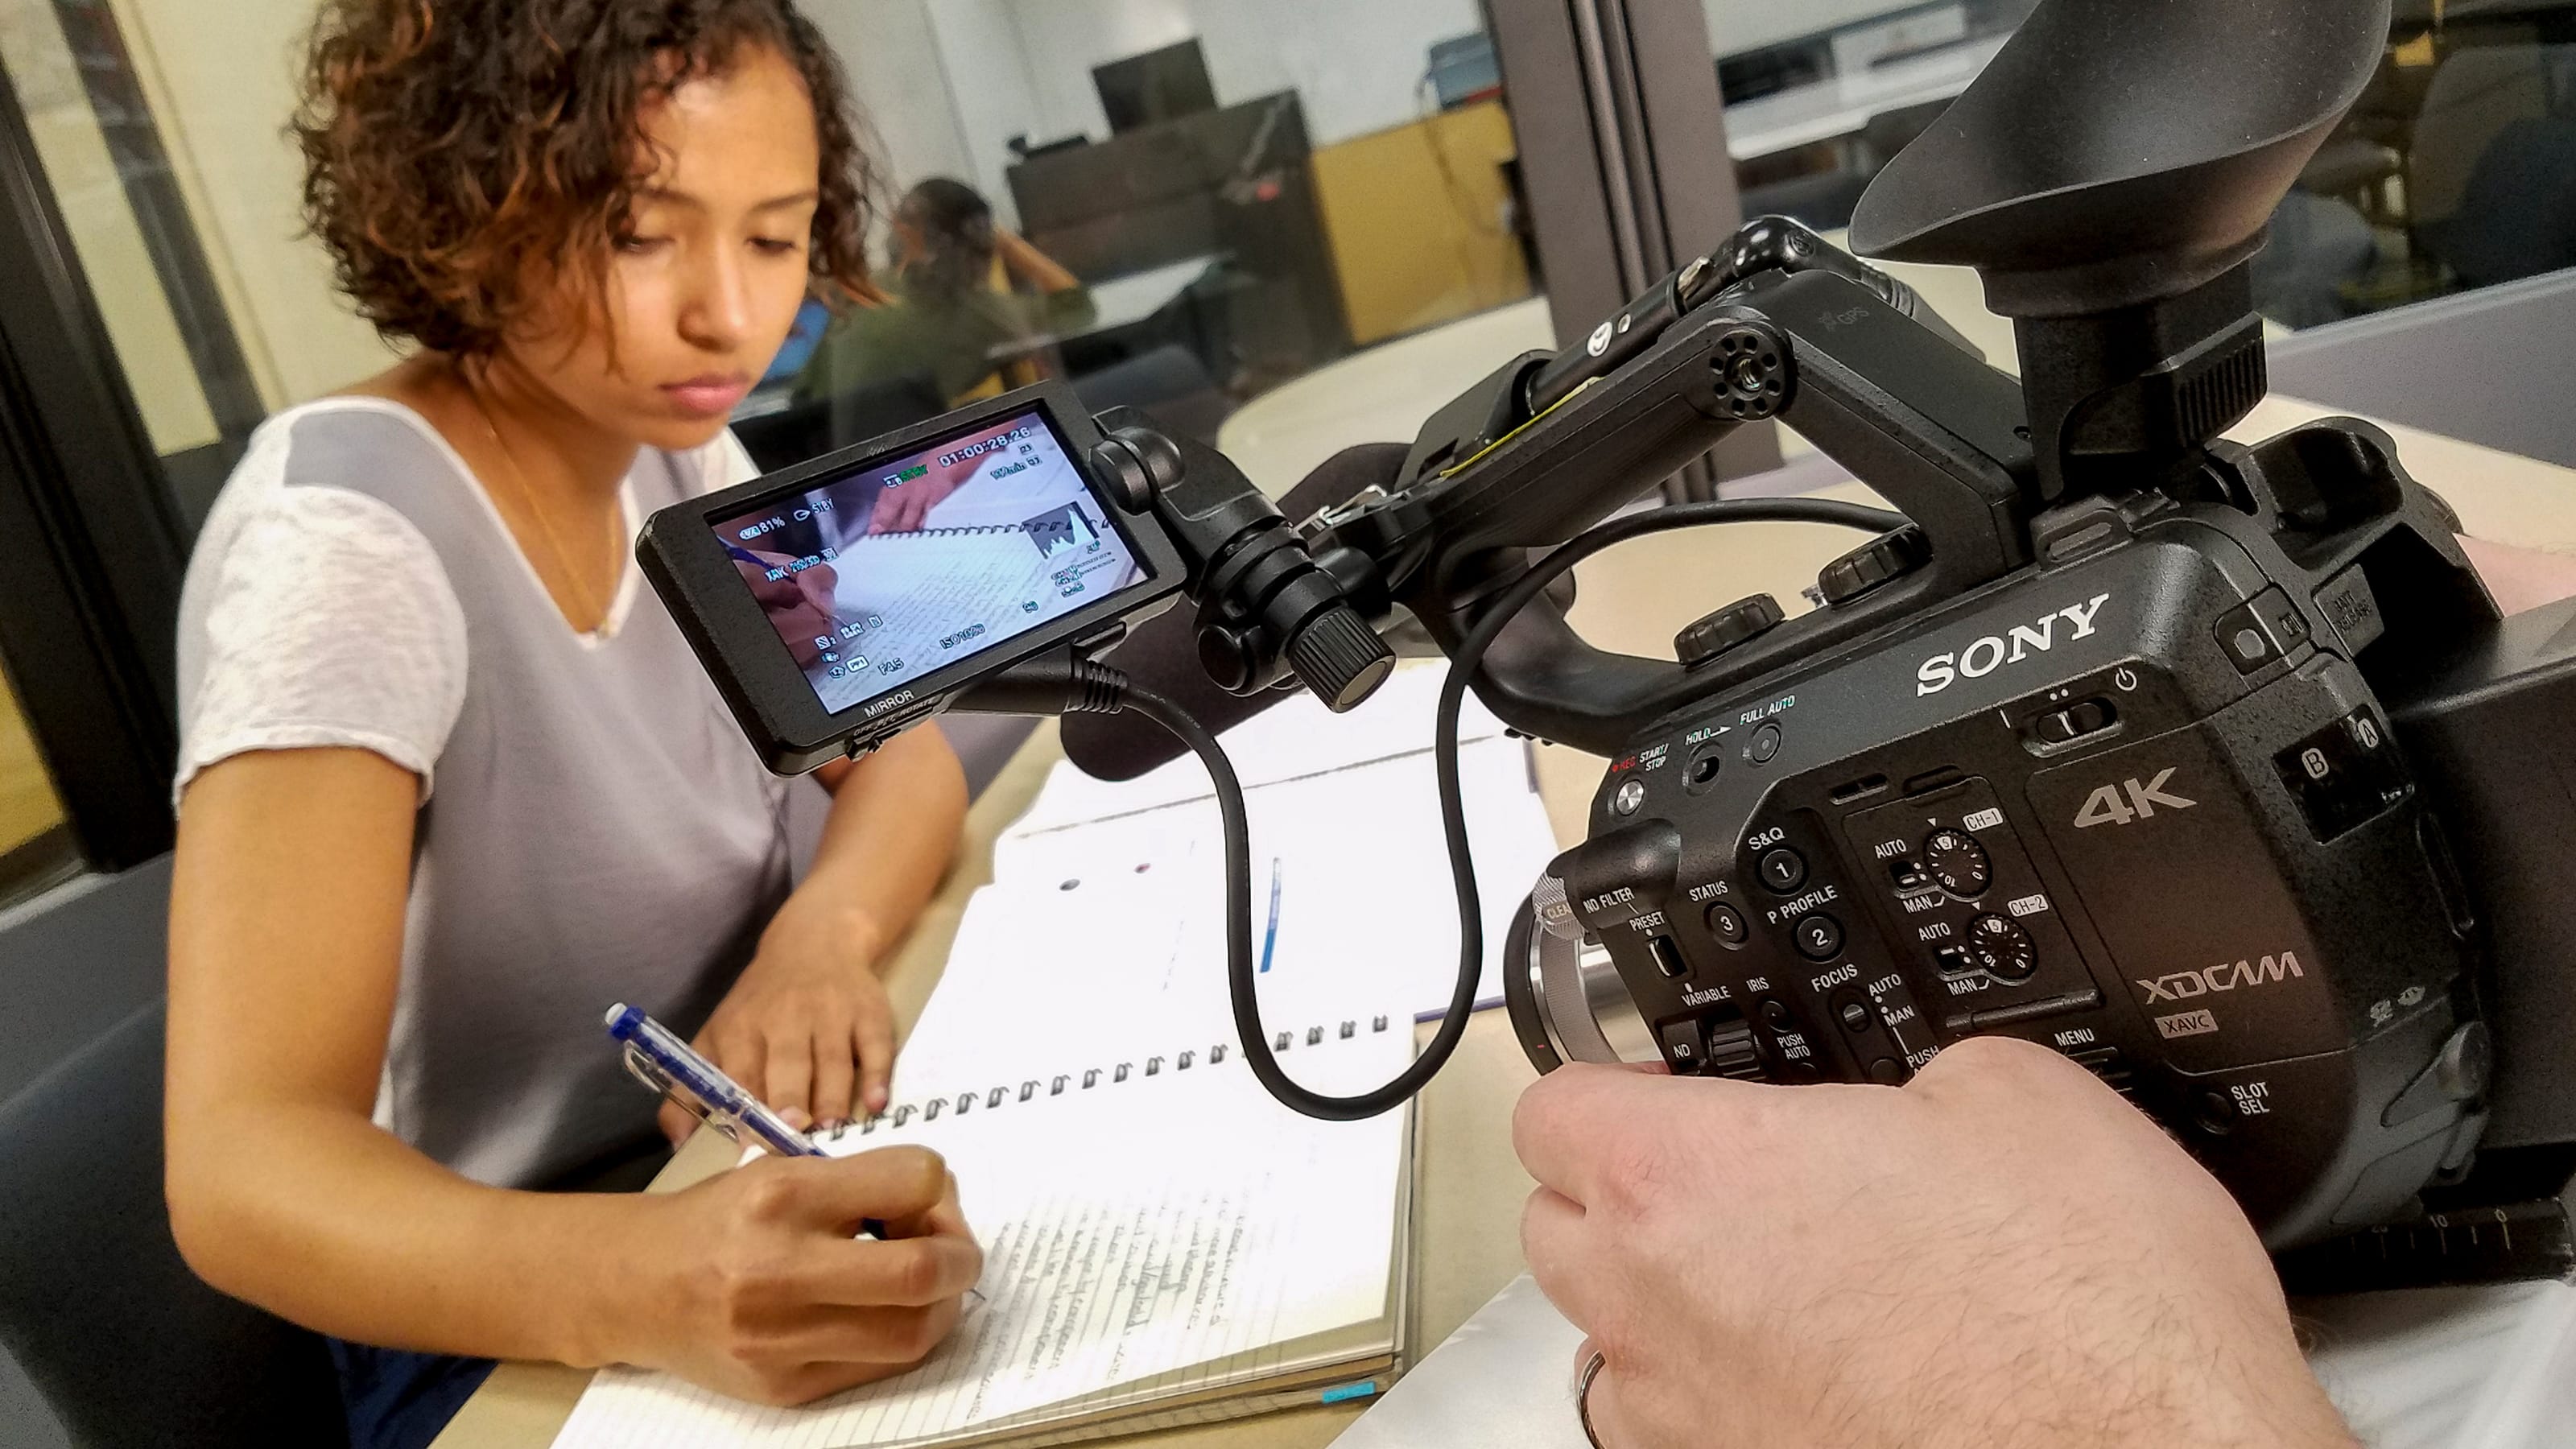 Student writing in a notebook being filmed by camera.